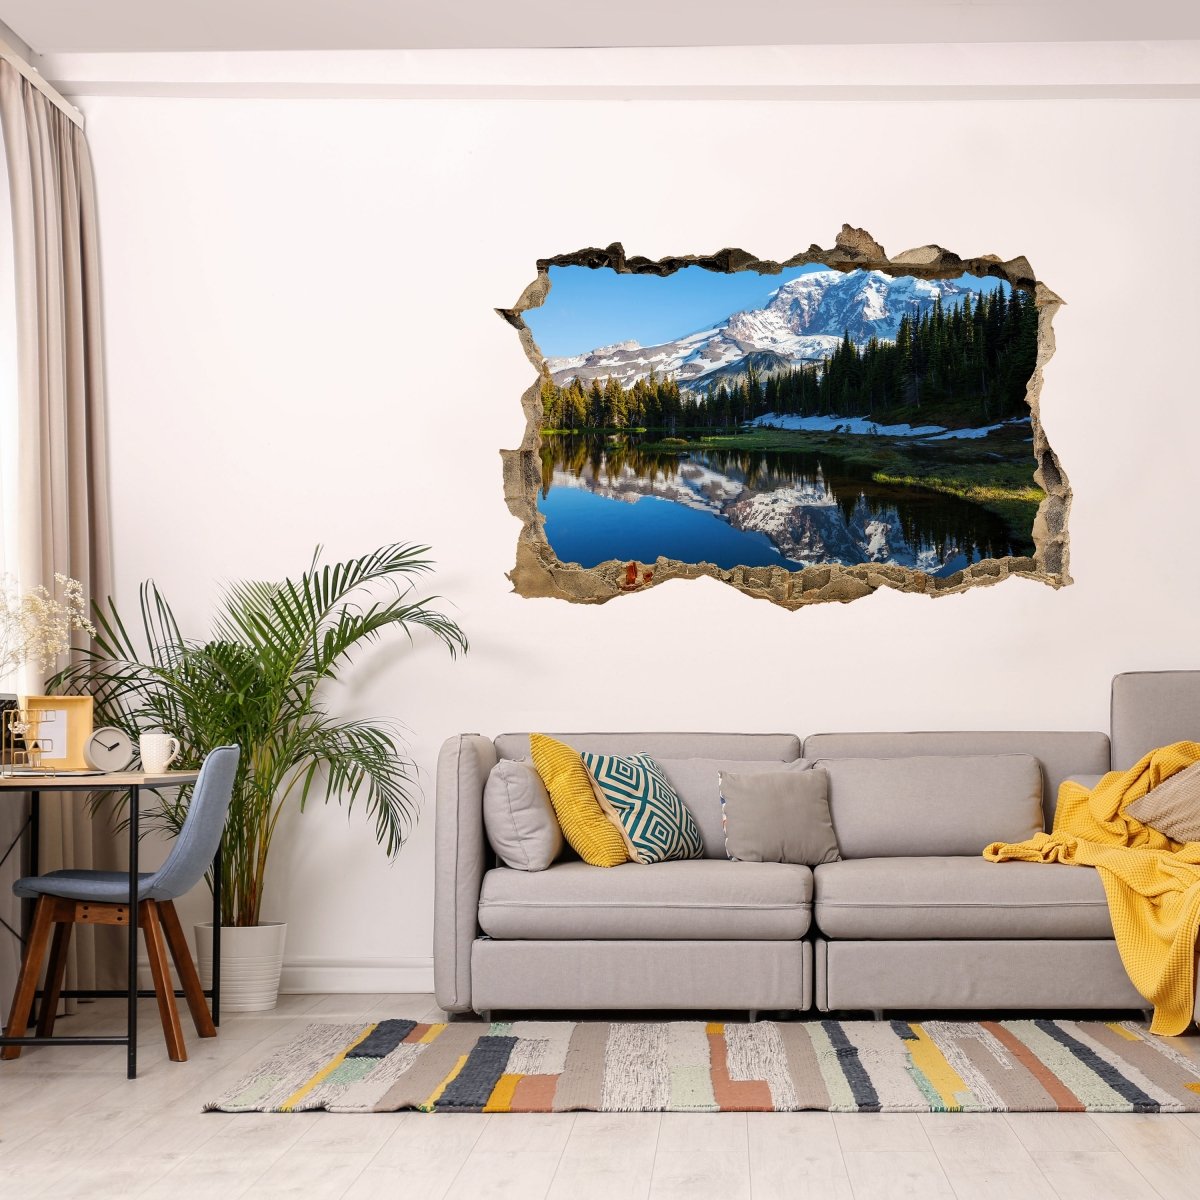 3D wall sticker forest with a lake on a mountain landscape - Wall Decal M0880